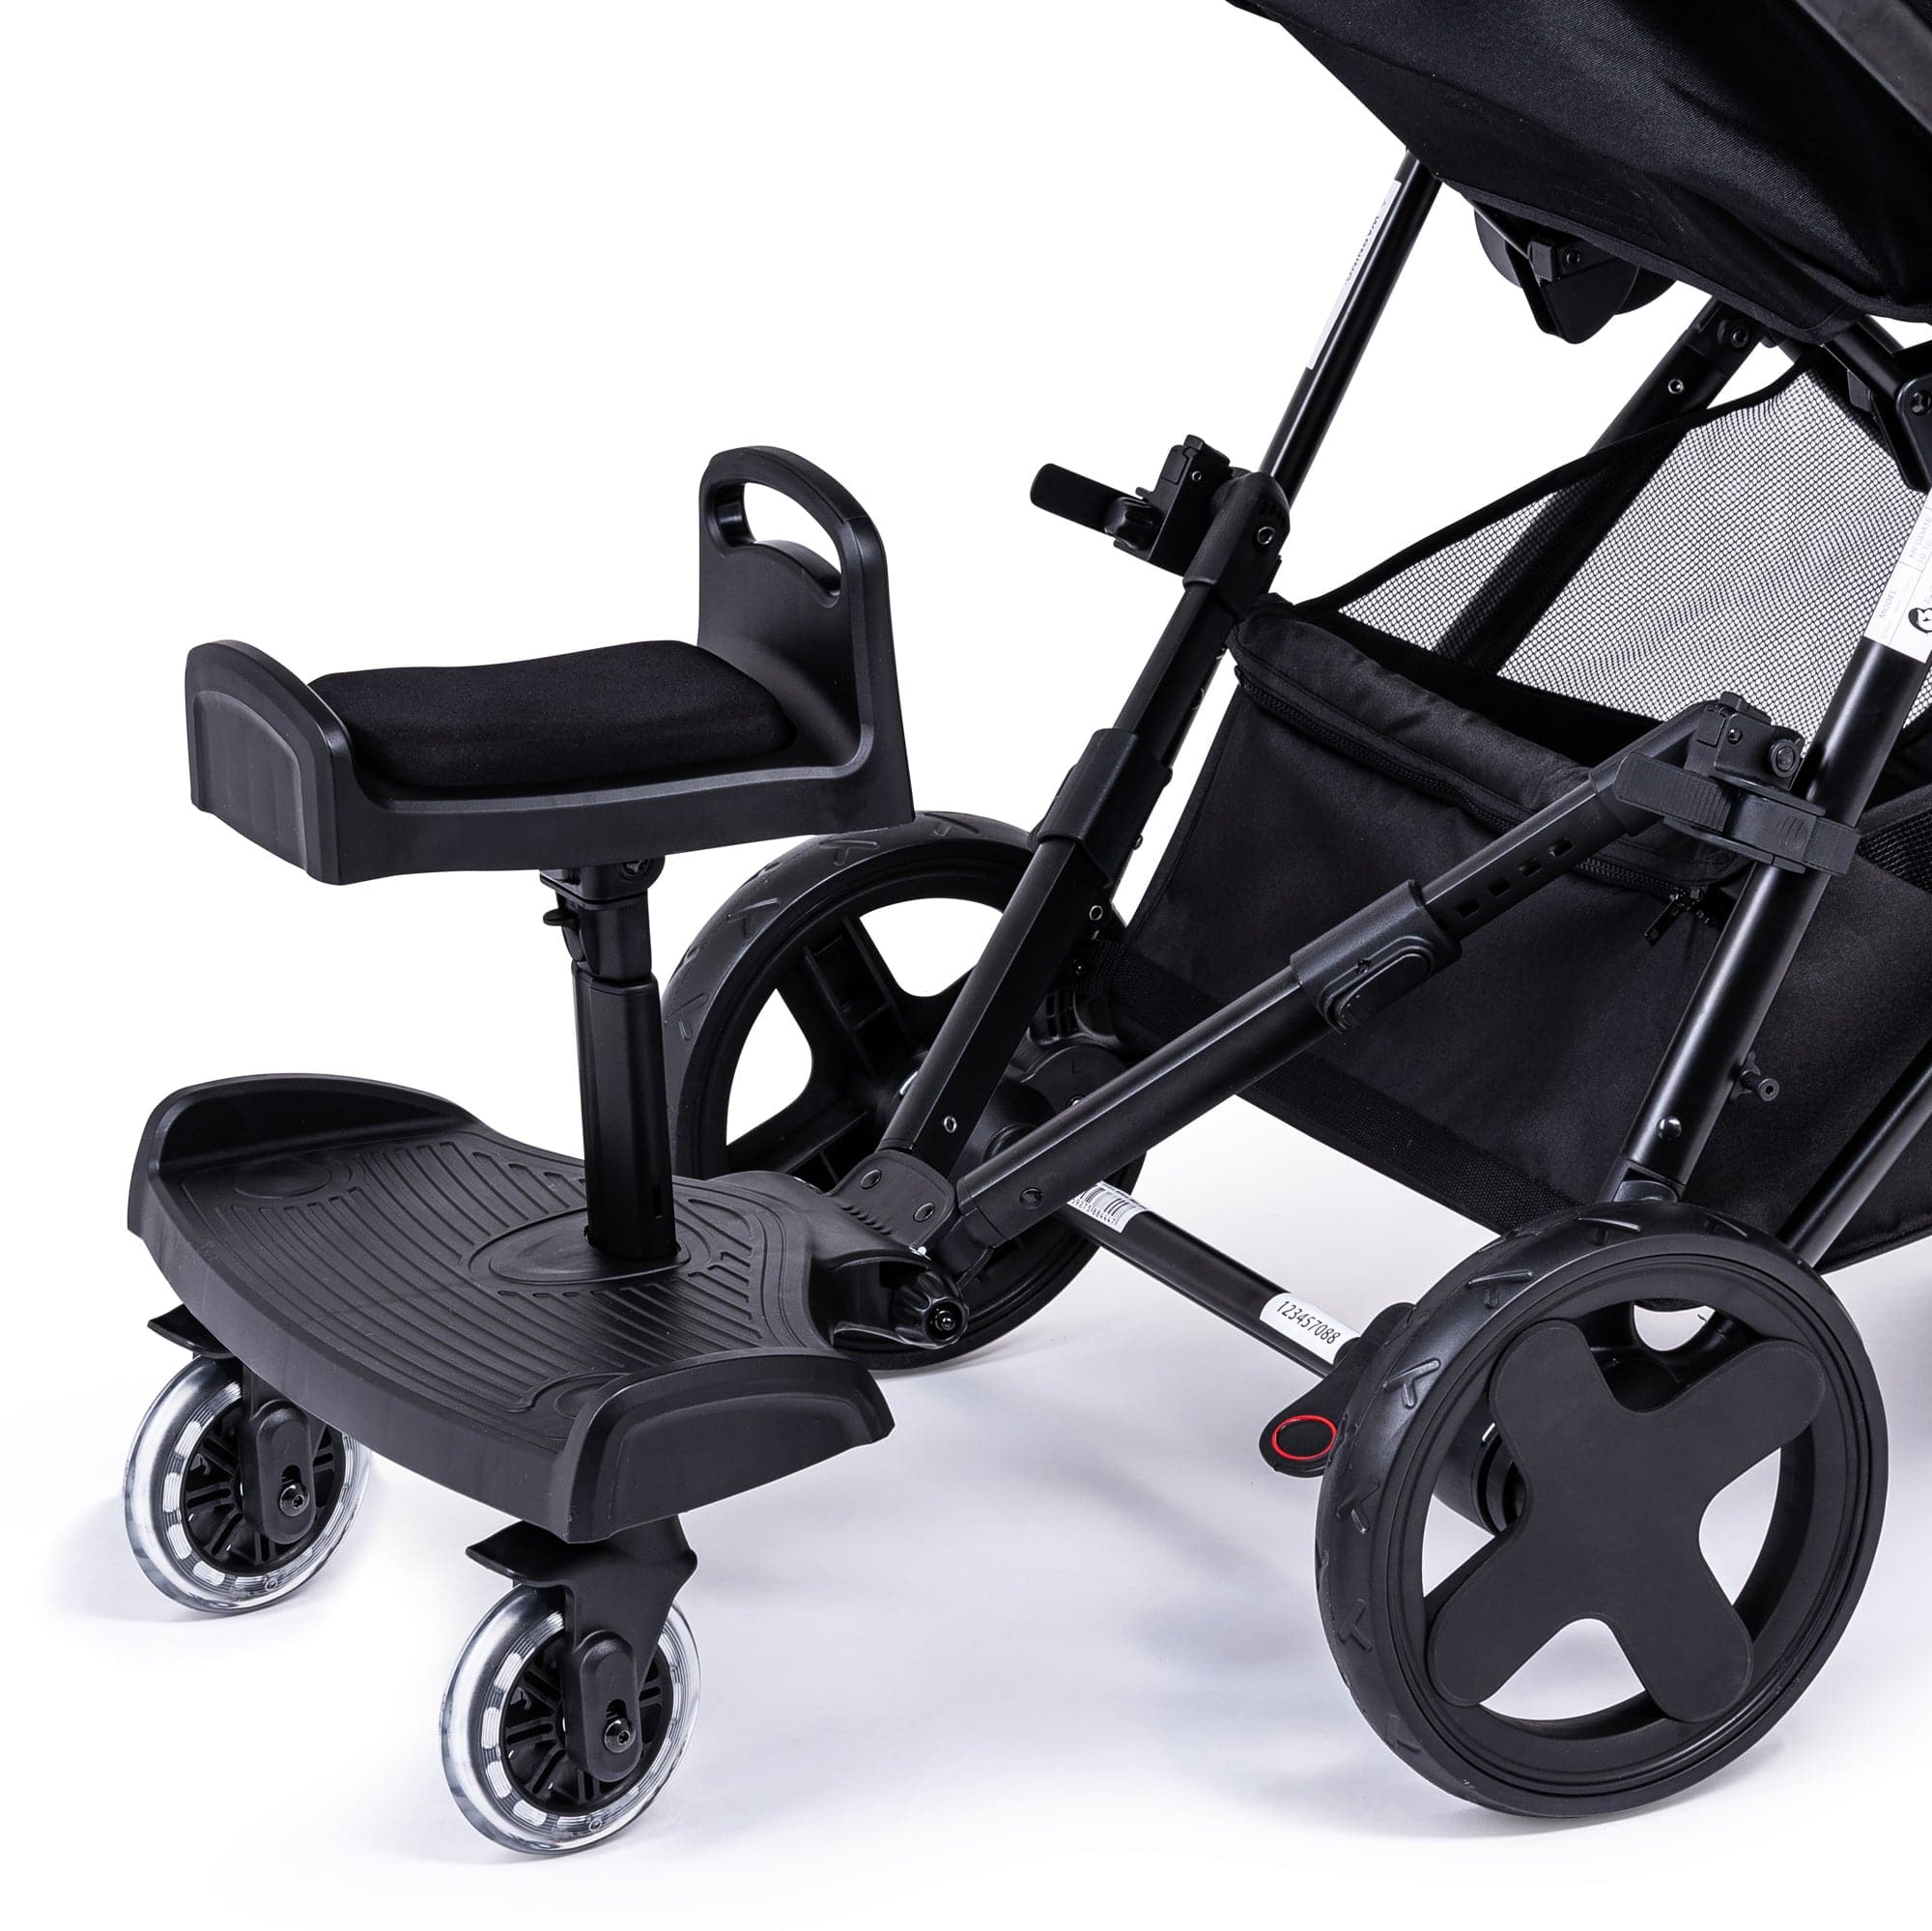 Ride On Board with Seat Compatible with BOB - For Your Little One